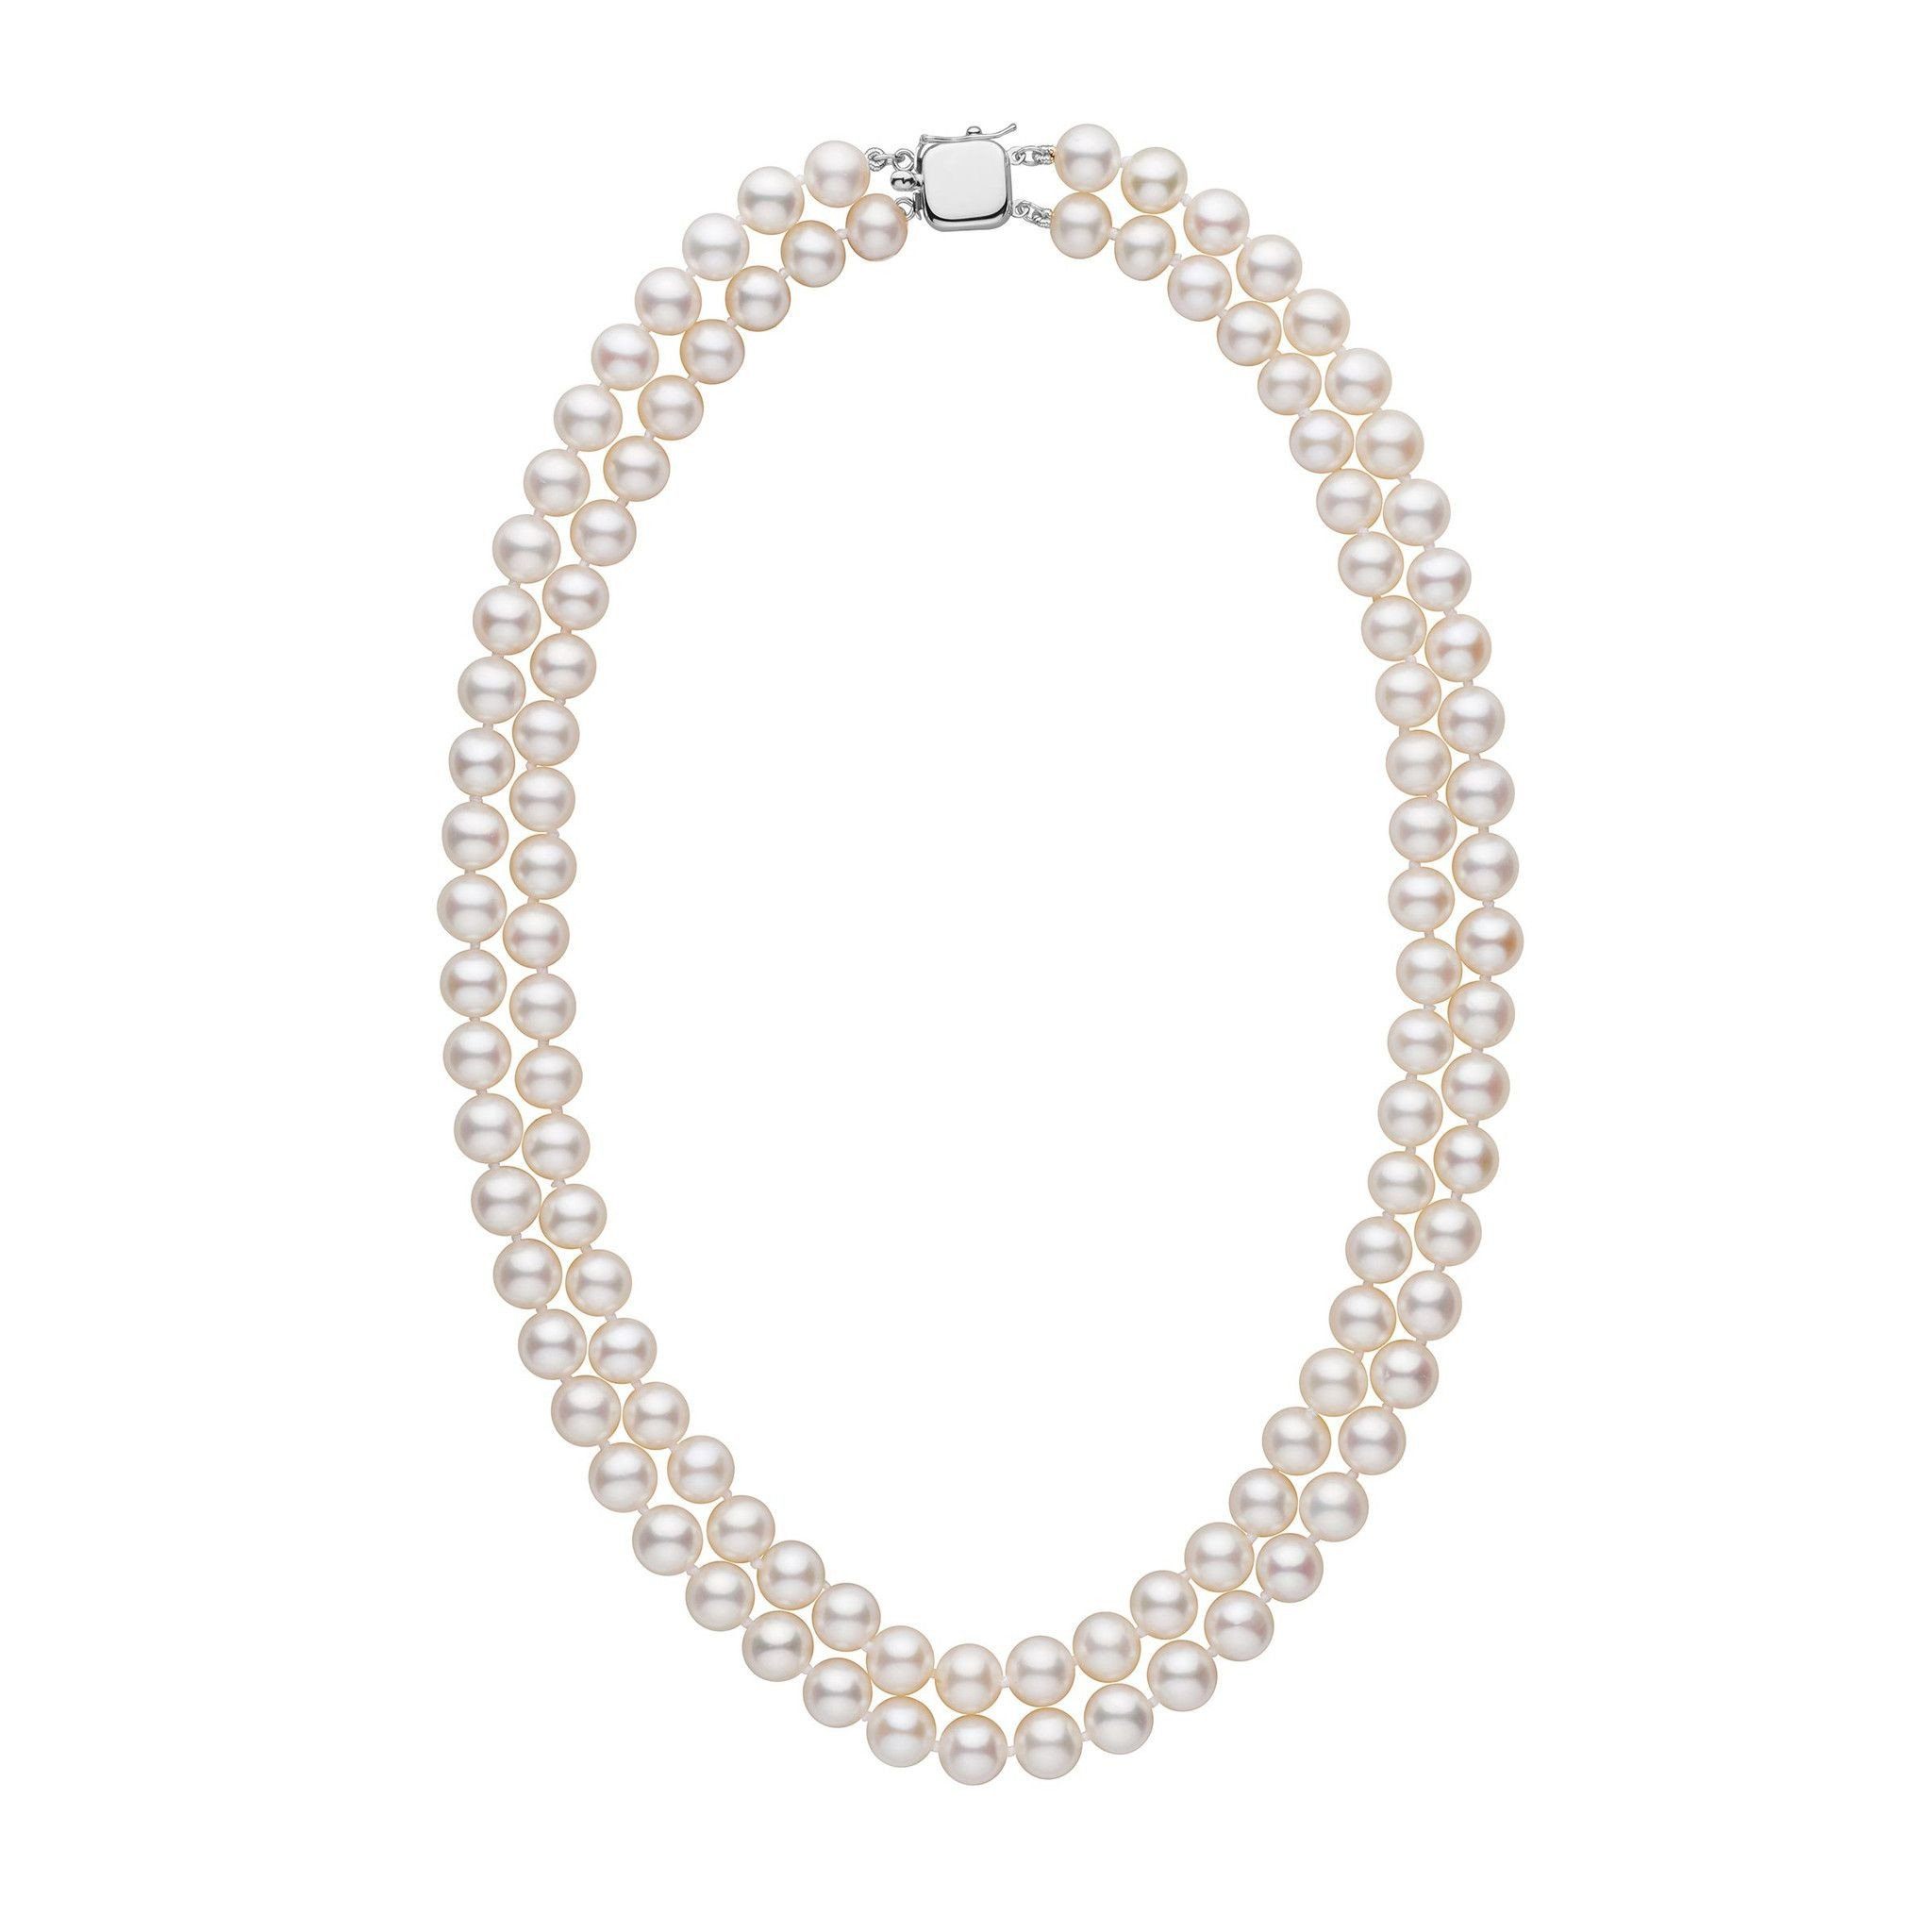 http://www.pearlparadise.com/cdn/shop/products/75-80-mm-double-strand-aaa-white-freshwater-pearl-necklace-necklace.jpg?v=1523299251